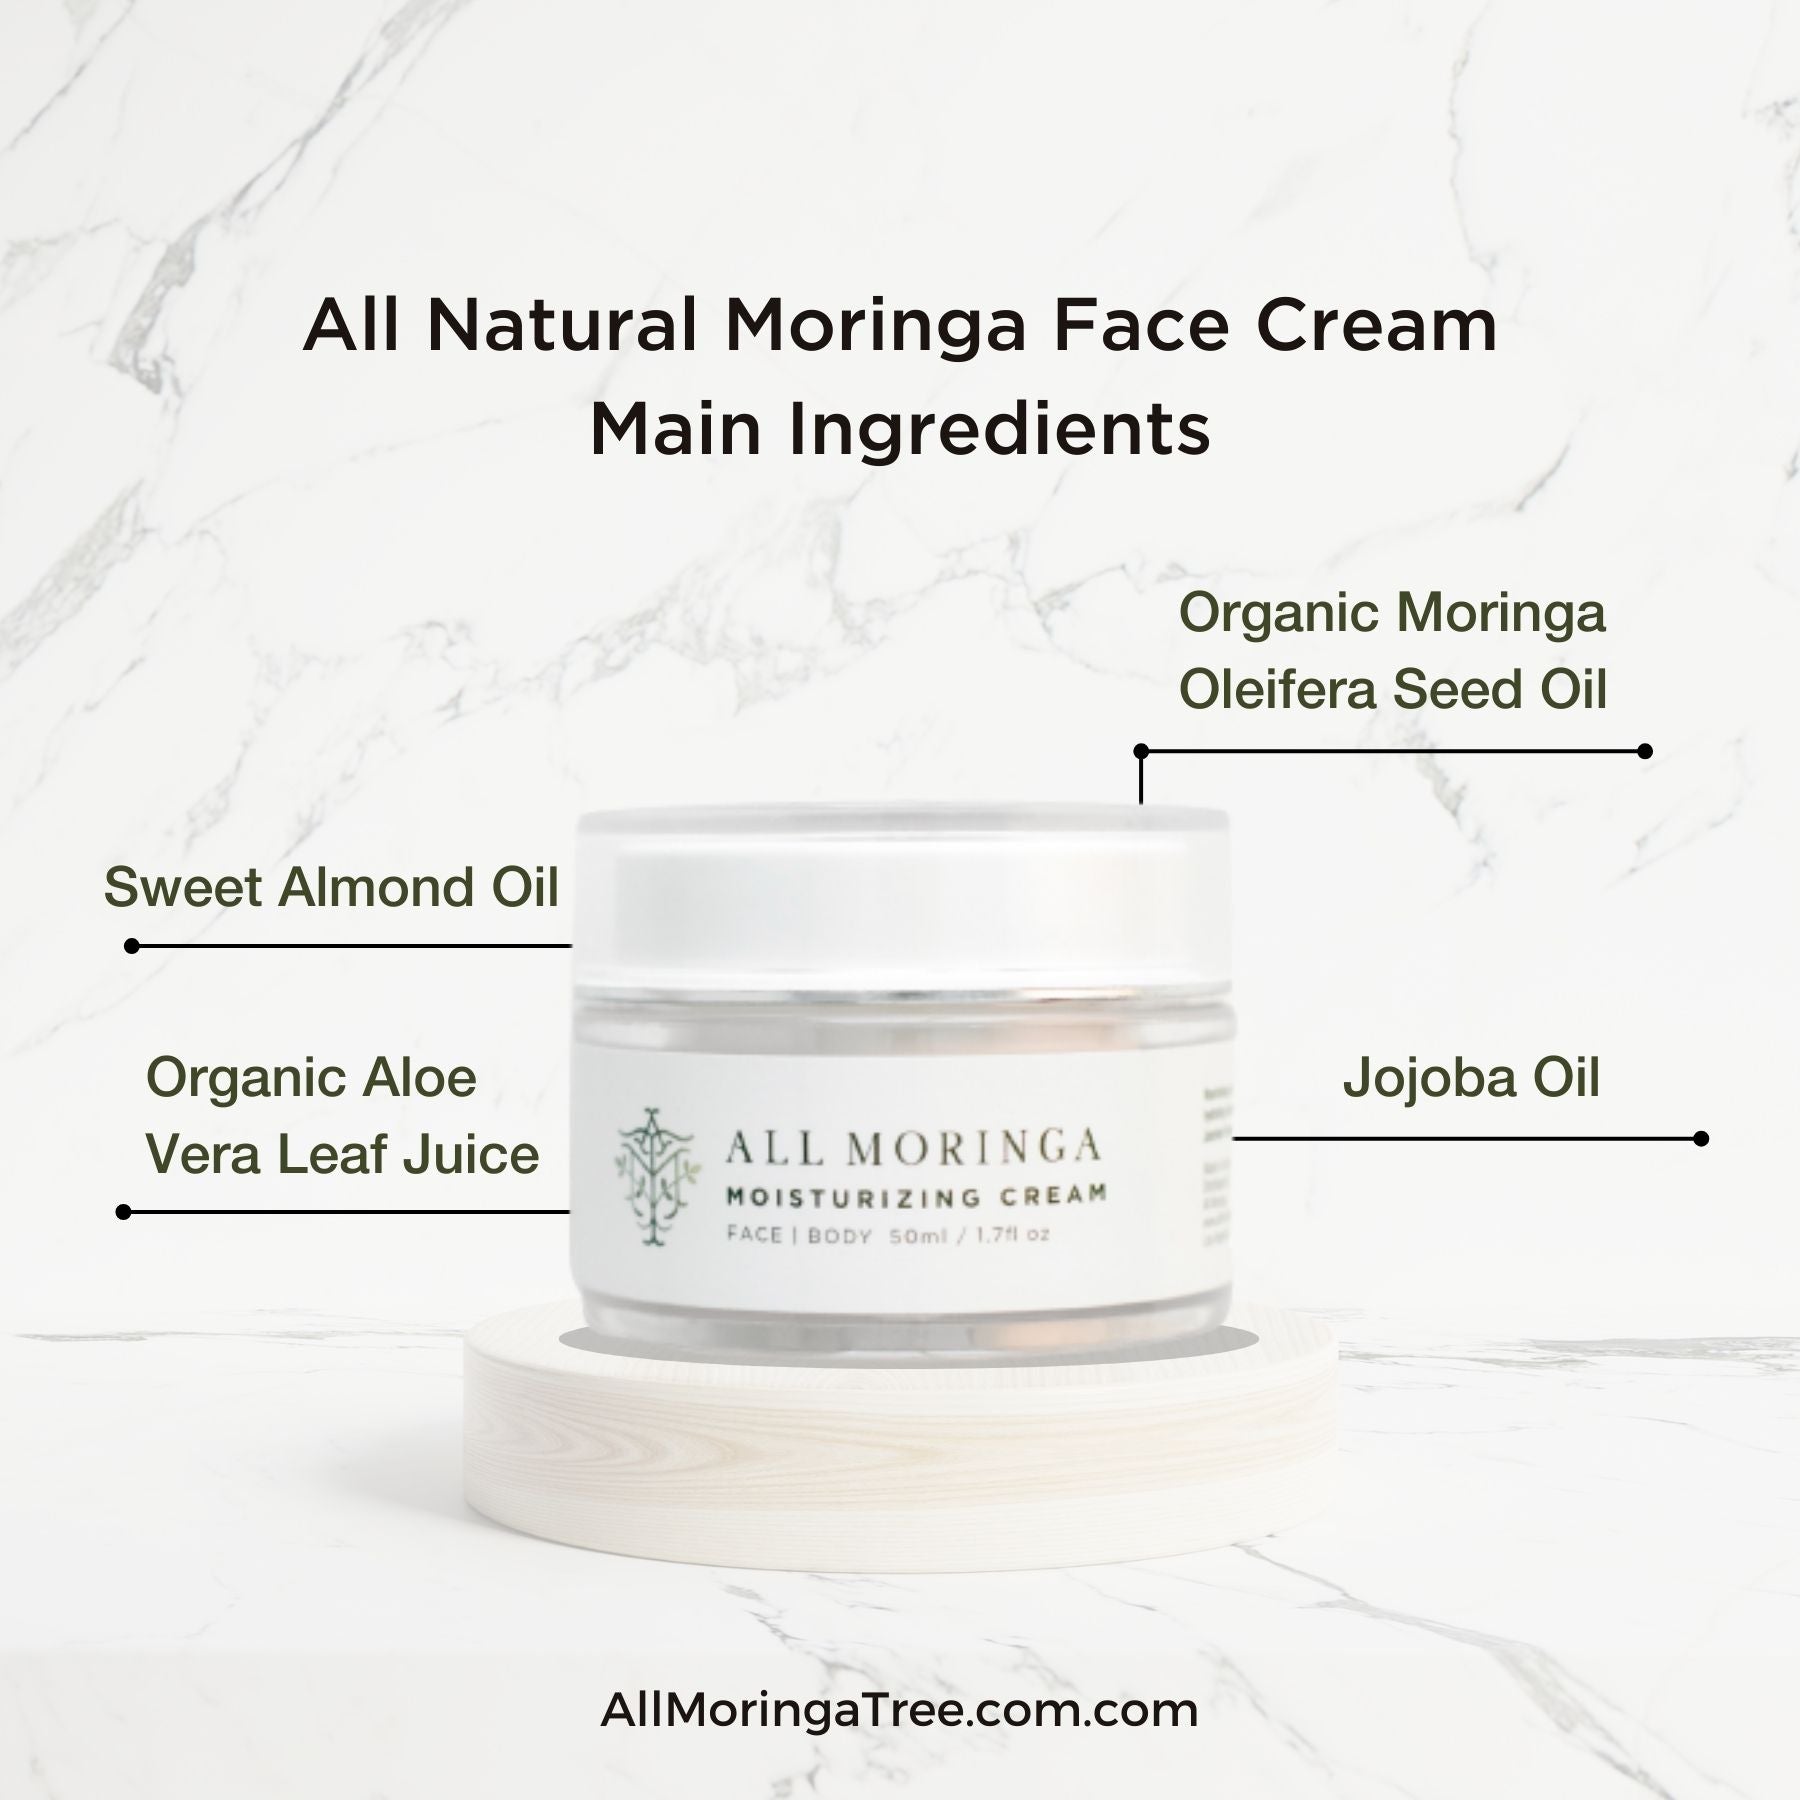 100% All Natural Moringa Moisturizing Face Cream for Hydrated & Glowing Skin